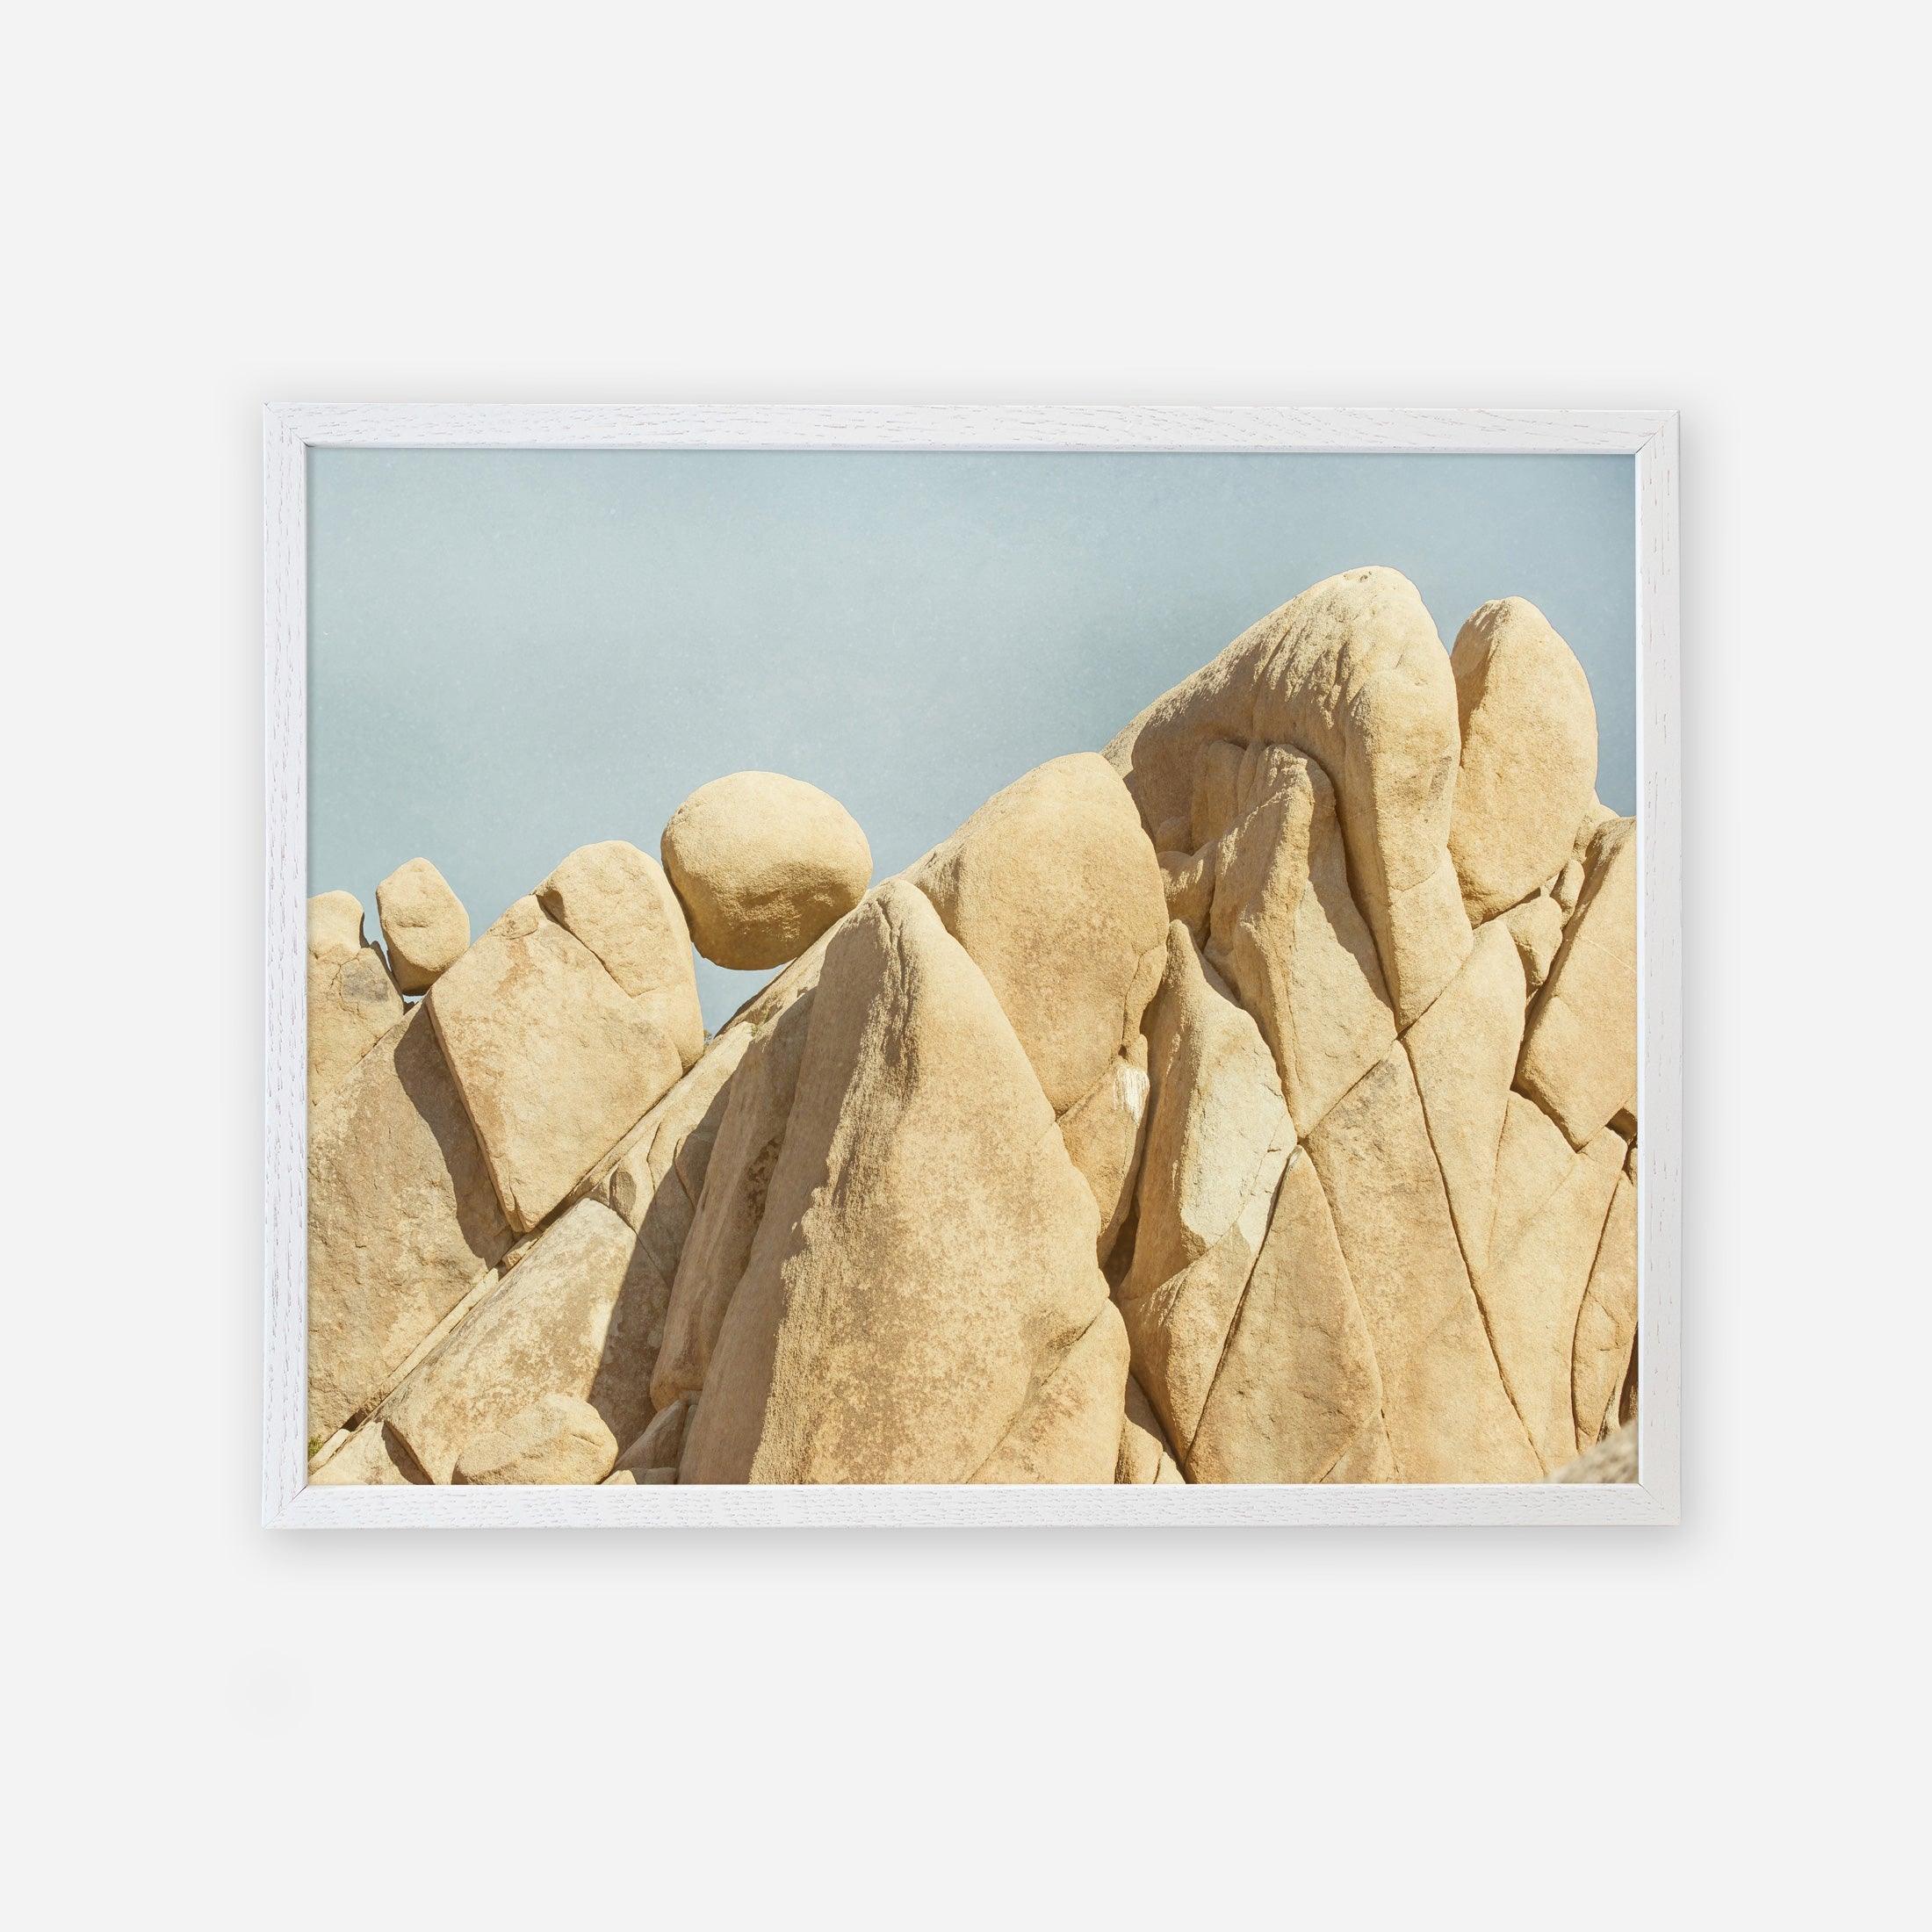 A framed photo of weathered, rounded rock formations in Joshua Tree National Park against a pale blue sky. The rock textures are smooth and intricate, highlighting natural erosion. The frame is simple and white.
Product: Offley Green&#39;s Joshua Tree Print, &#39;Rock Formations&#39;